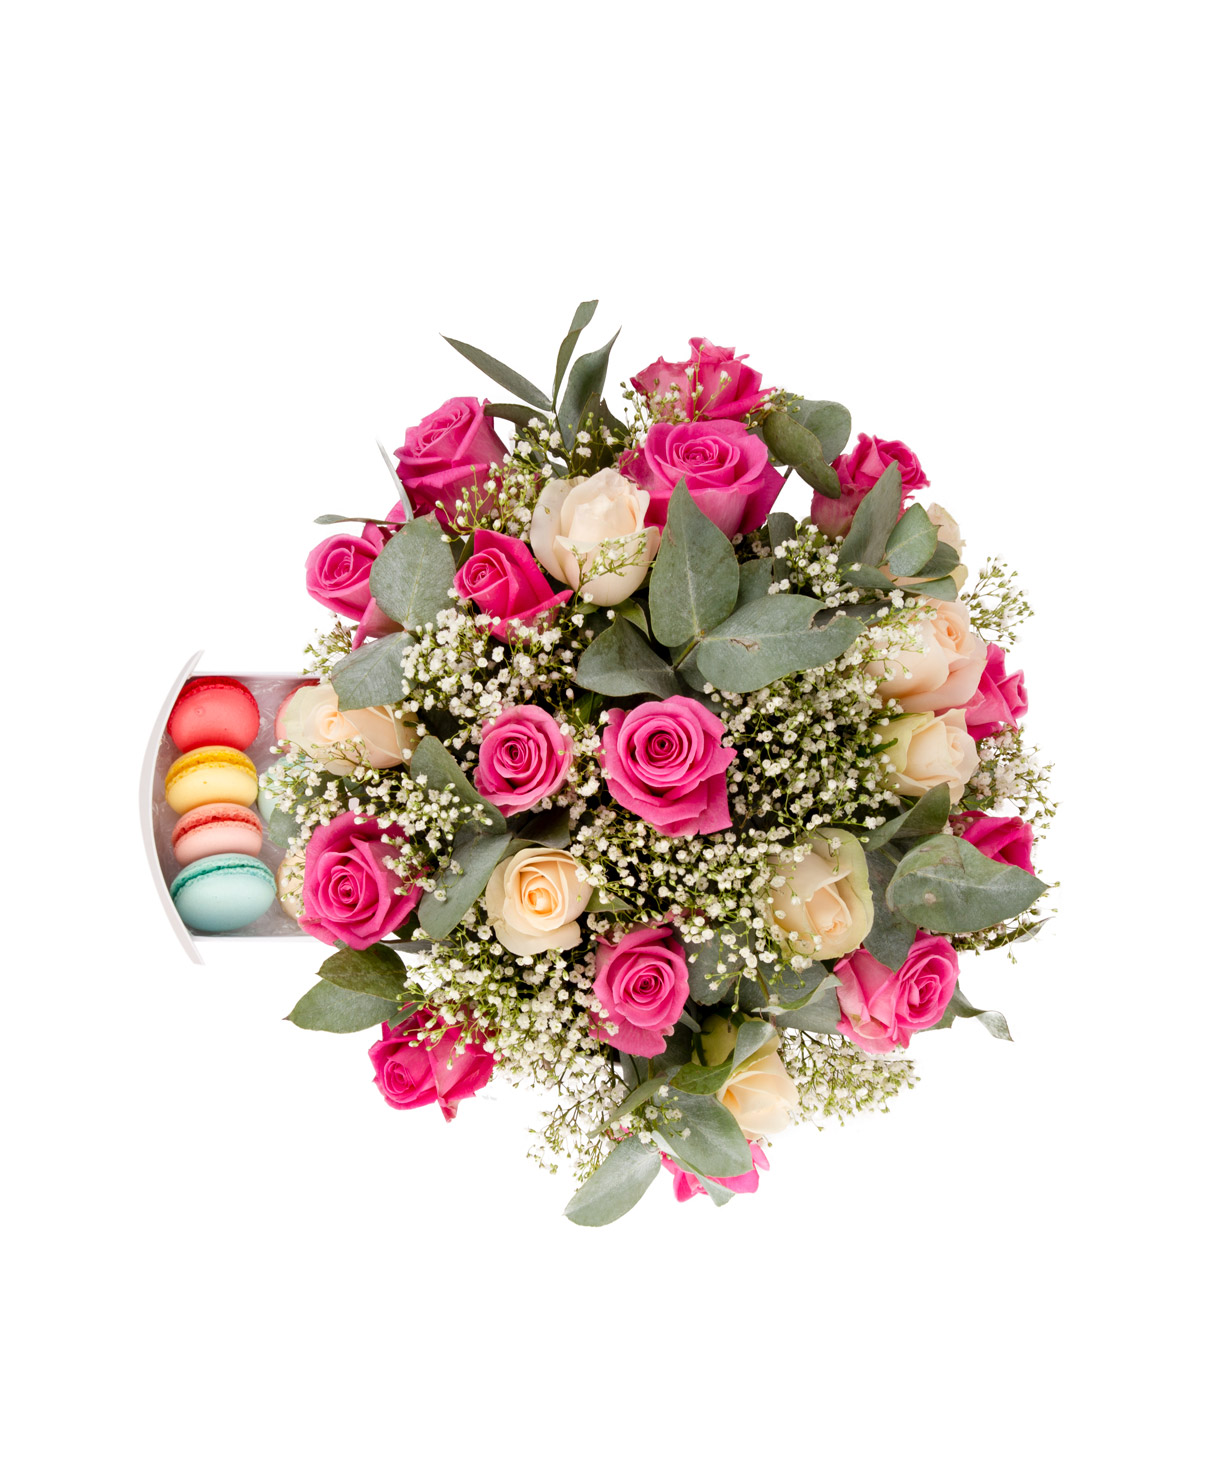 Composition `Delemon` with rose, gypsophila and sweets